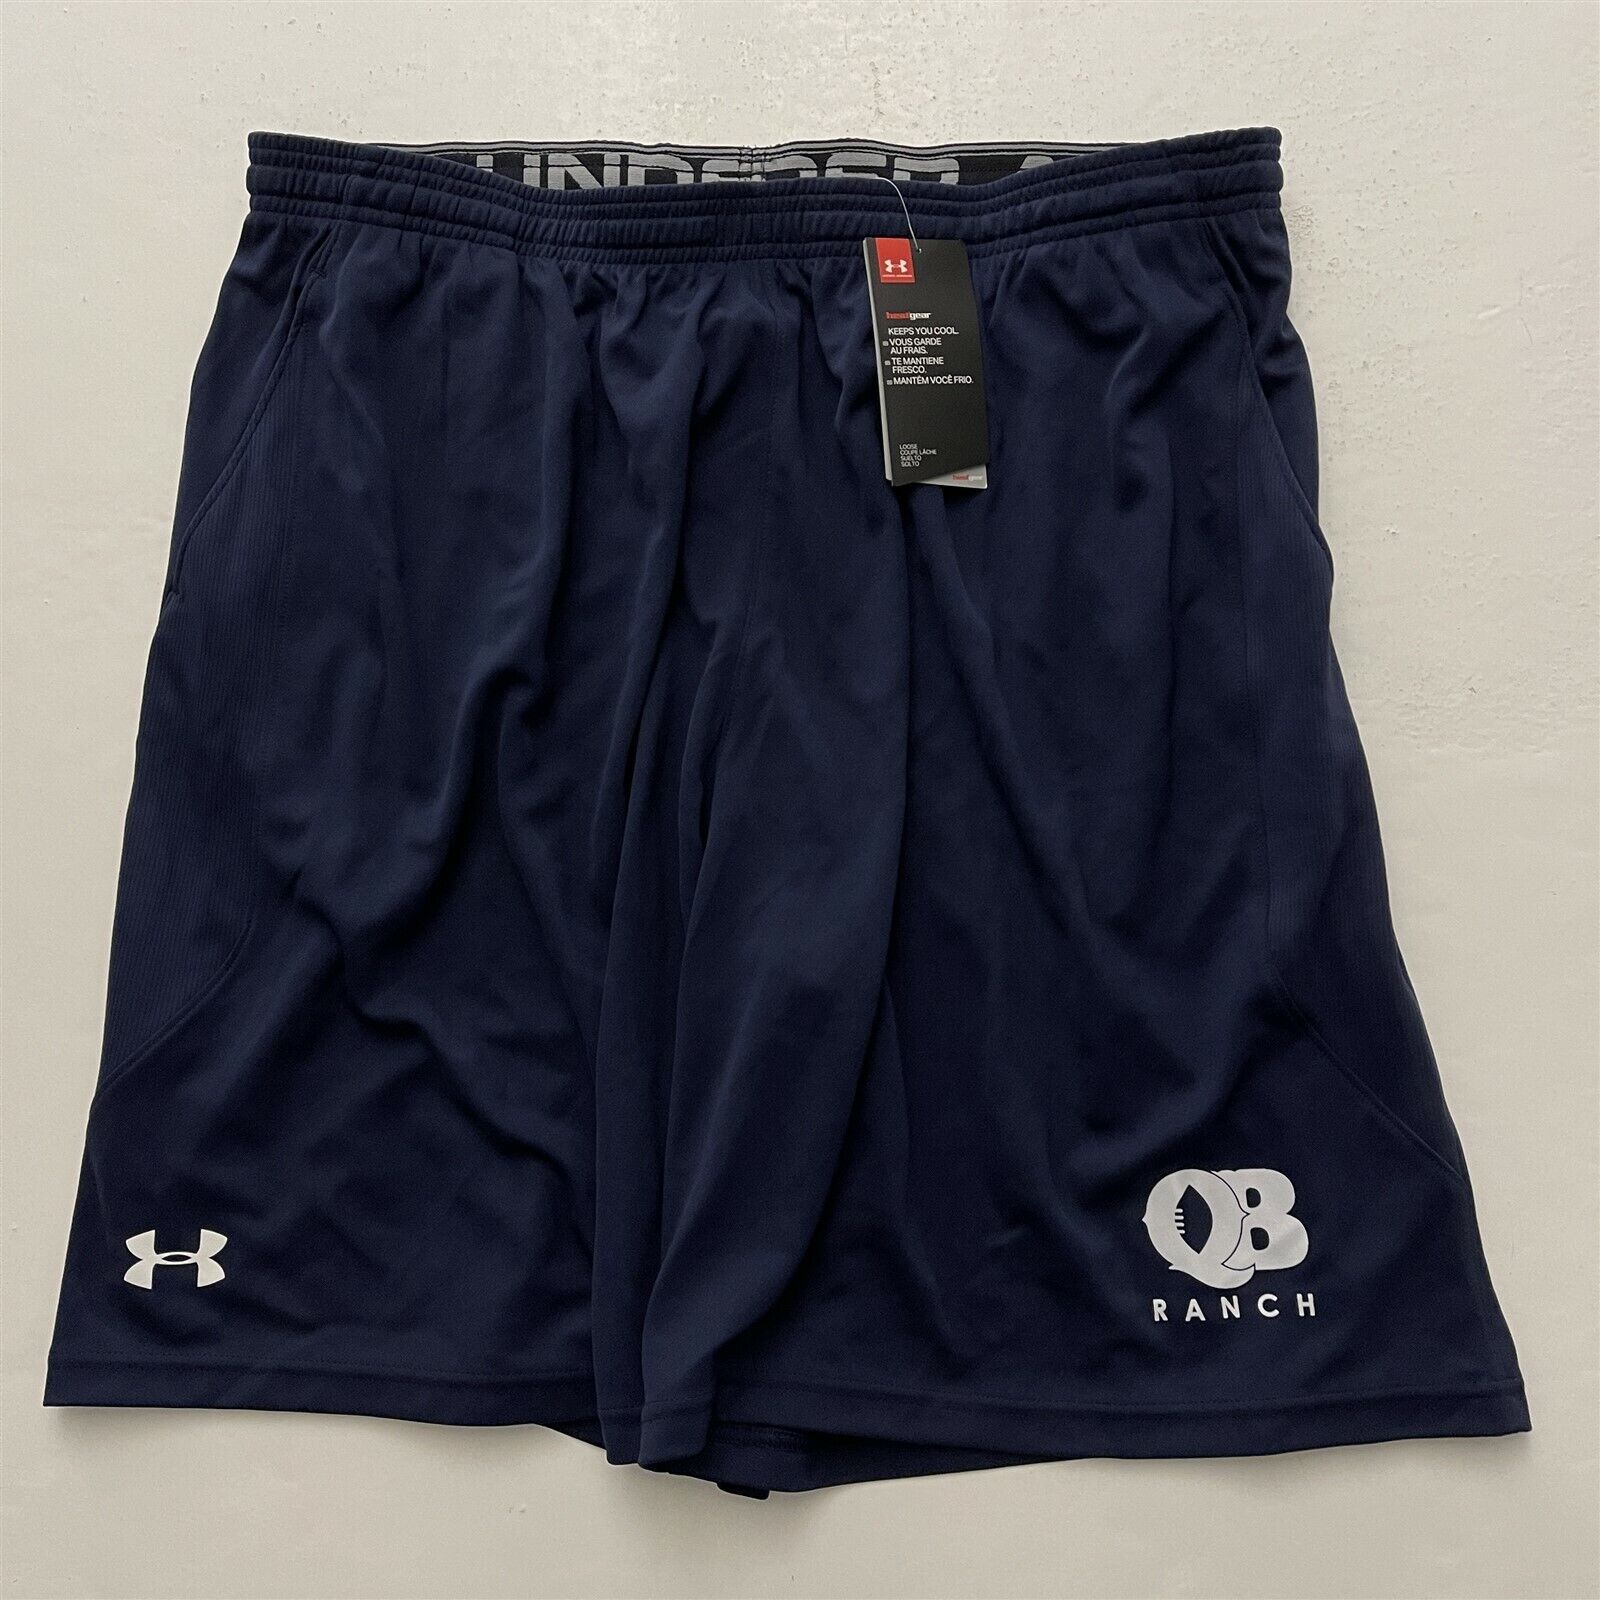 Read more about the article NWT Under Armour Heat Gear QB Ranch 2XL 36 x 9″ Navy Blue Drawstring Shorts